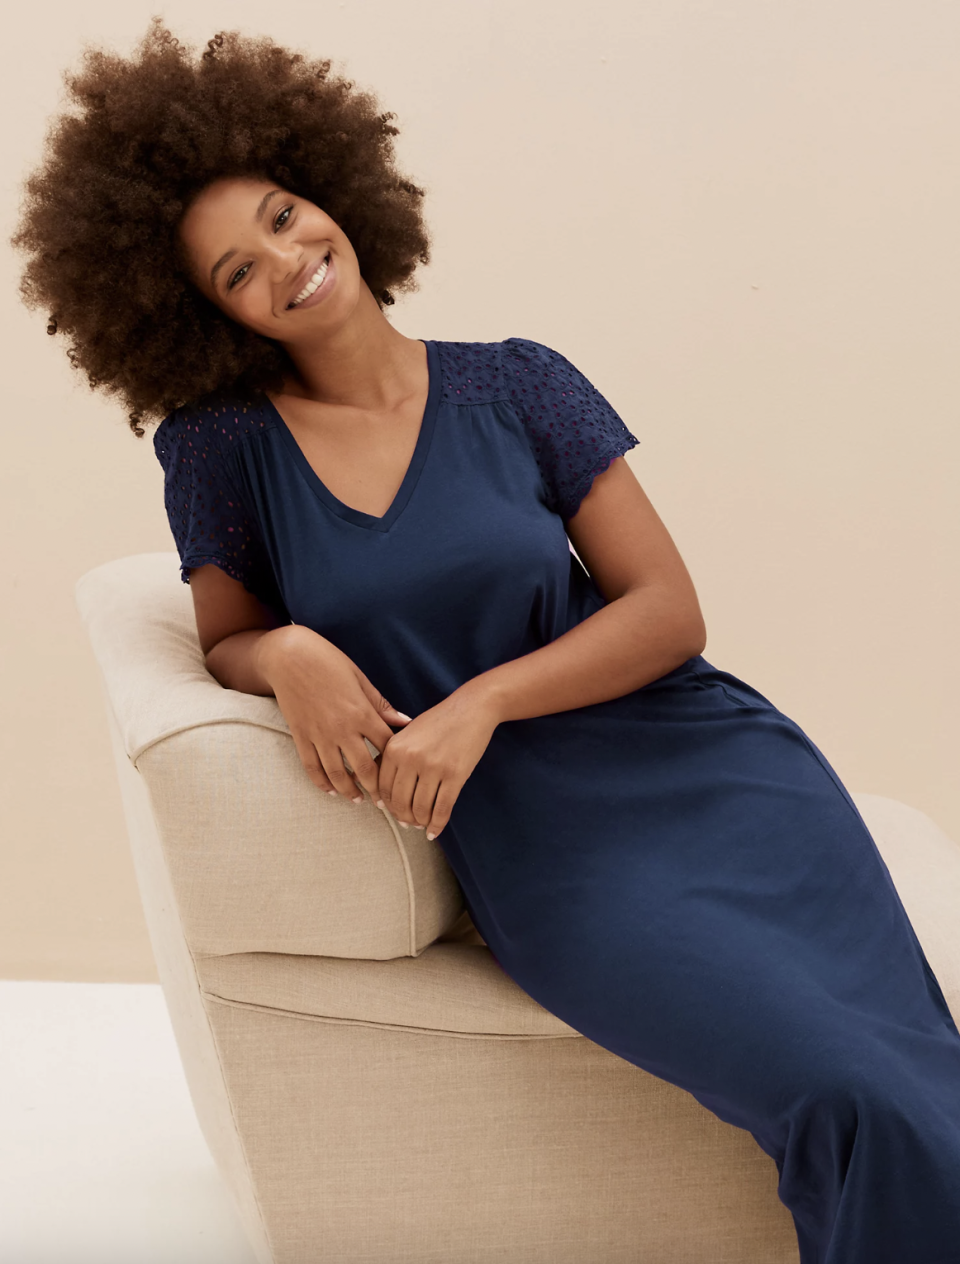 The comfy sleepwear comes in either white or navy. (Marks & Spencer)